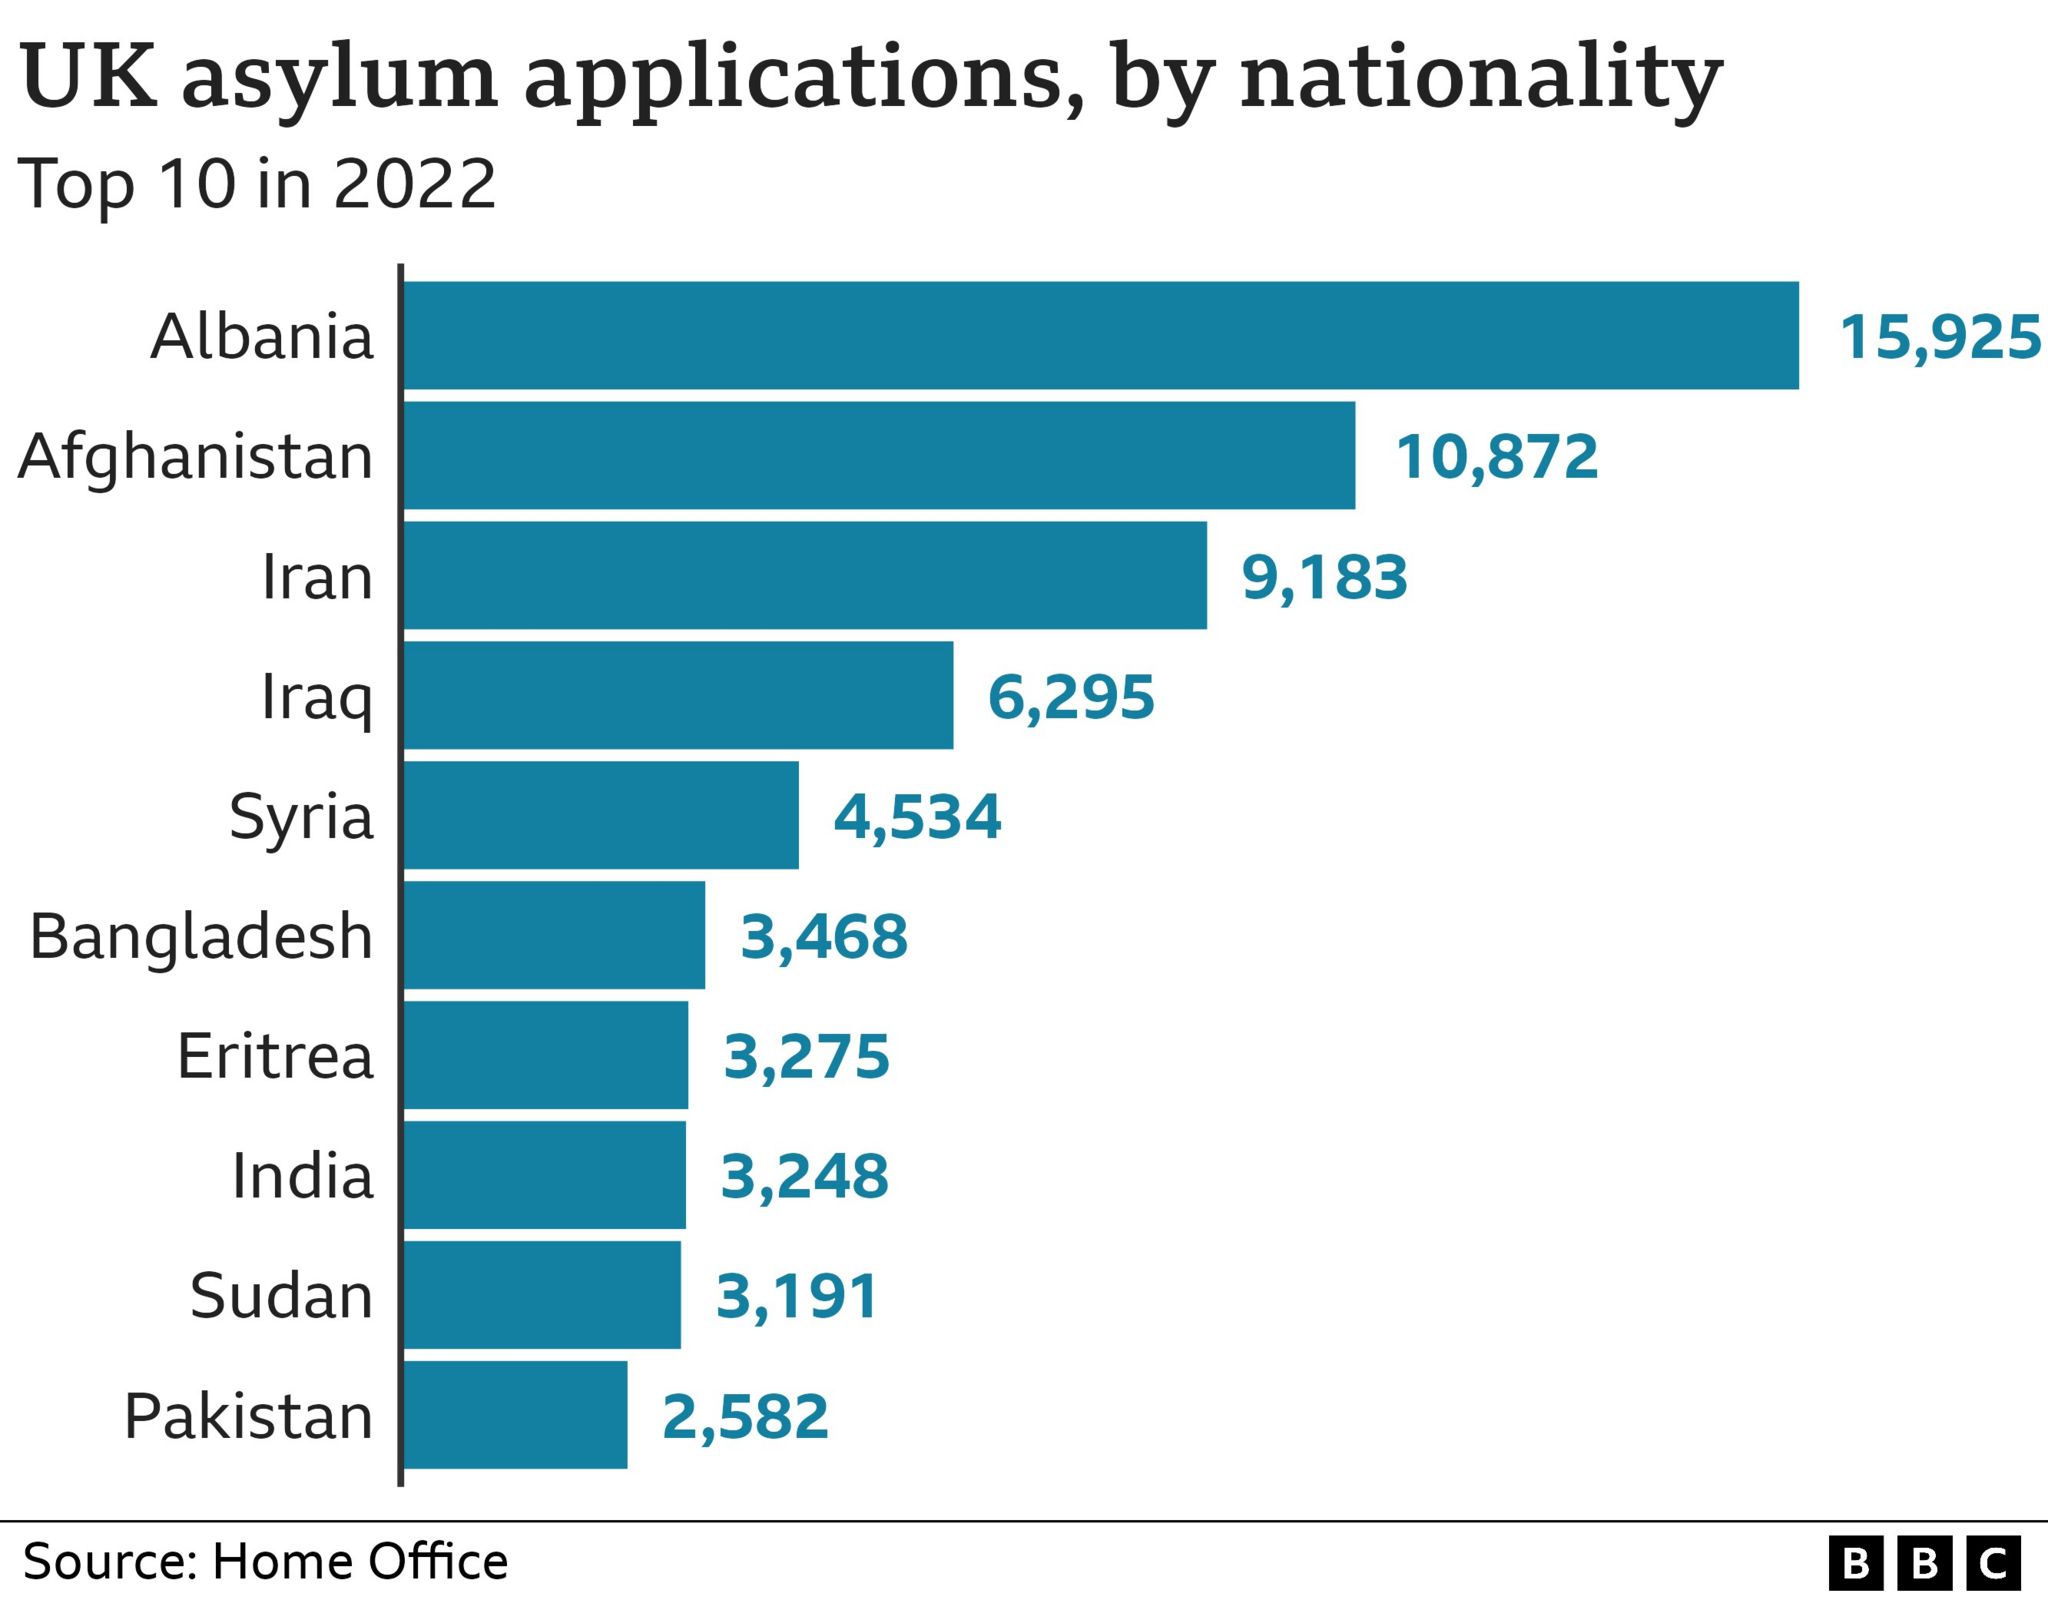 Chart showing number of UK asylum applications by nationality in the 12 months to December 2022, in descending order: Albania, Afghanistan, Iran, Iraq, Syria, Bangladesh, Eritrea, Sudan, Bangladesh, India, Sudan and Pakistan